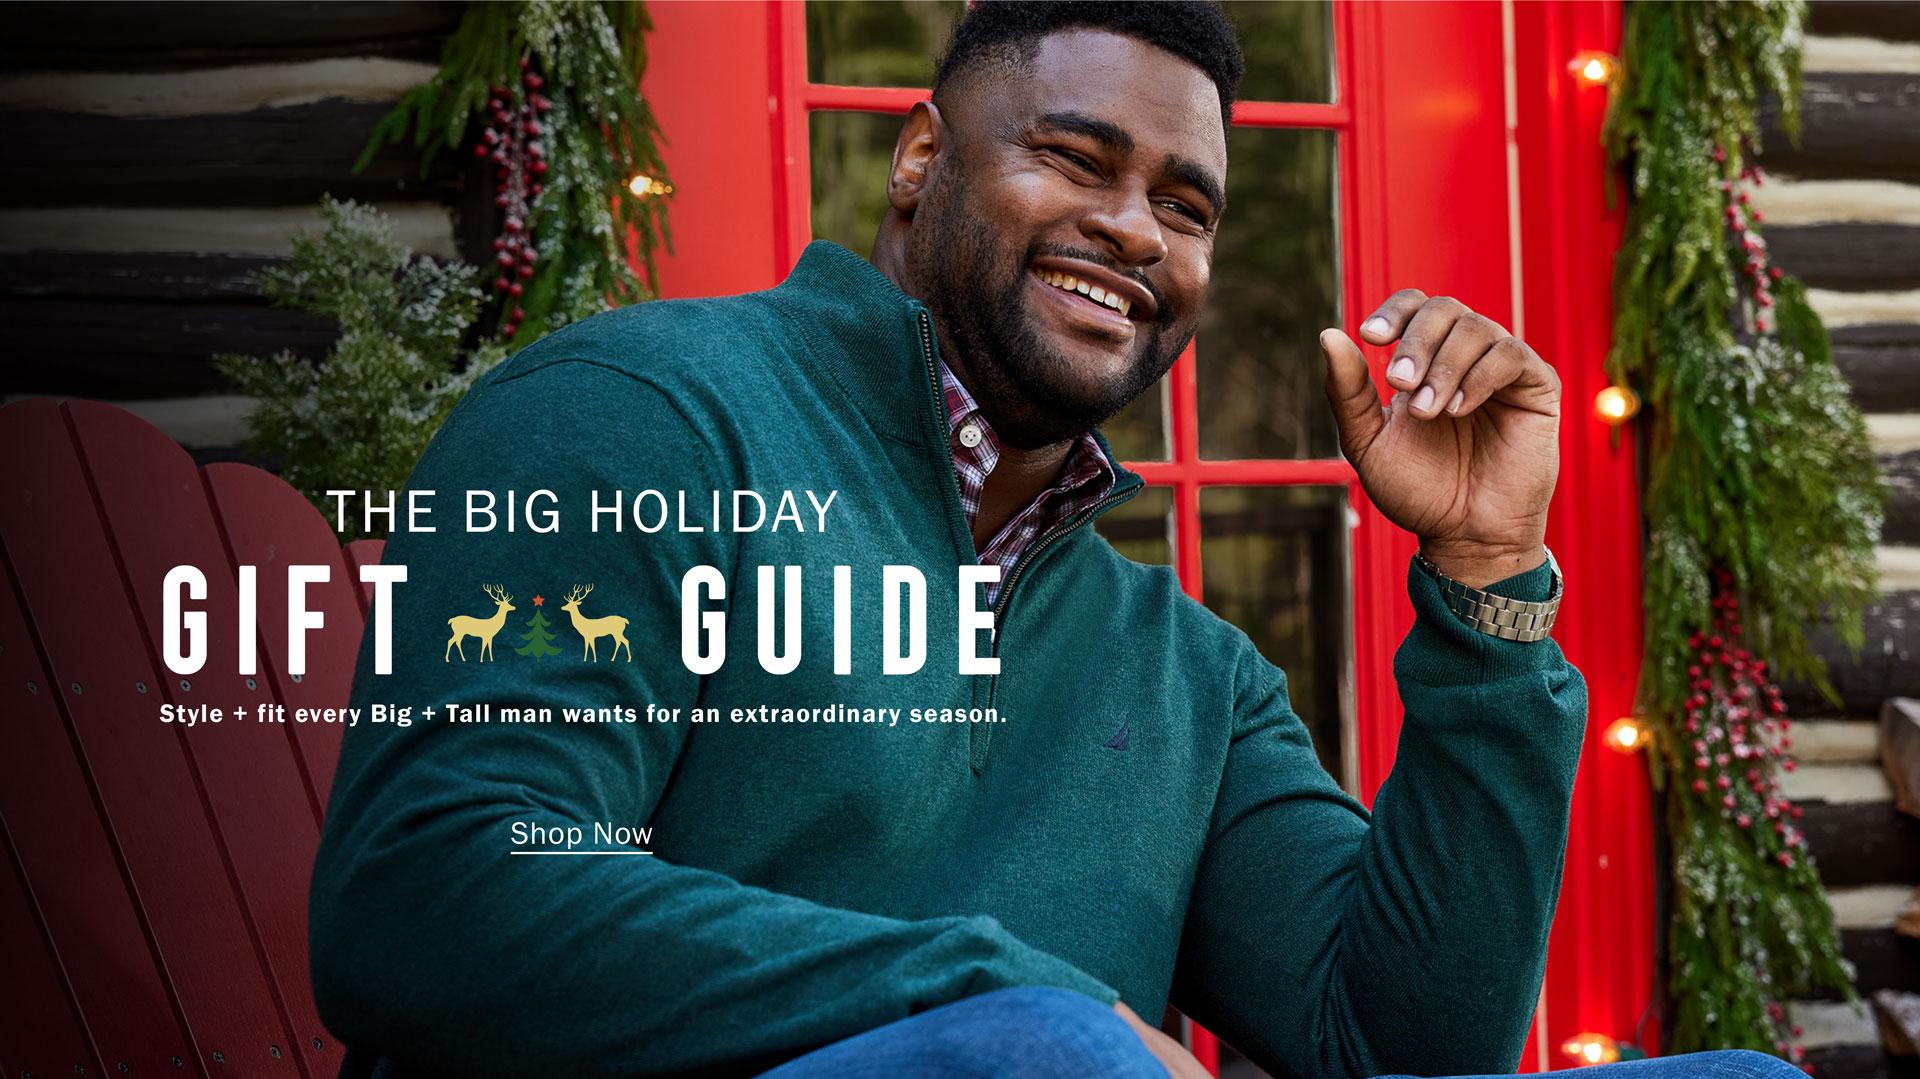 THE BIG HOLIDAY GIFT GUIDE | Style every Big + Tall man wants for an extraordinary season. | Shop Now